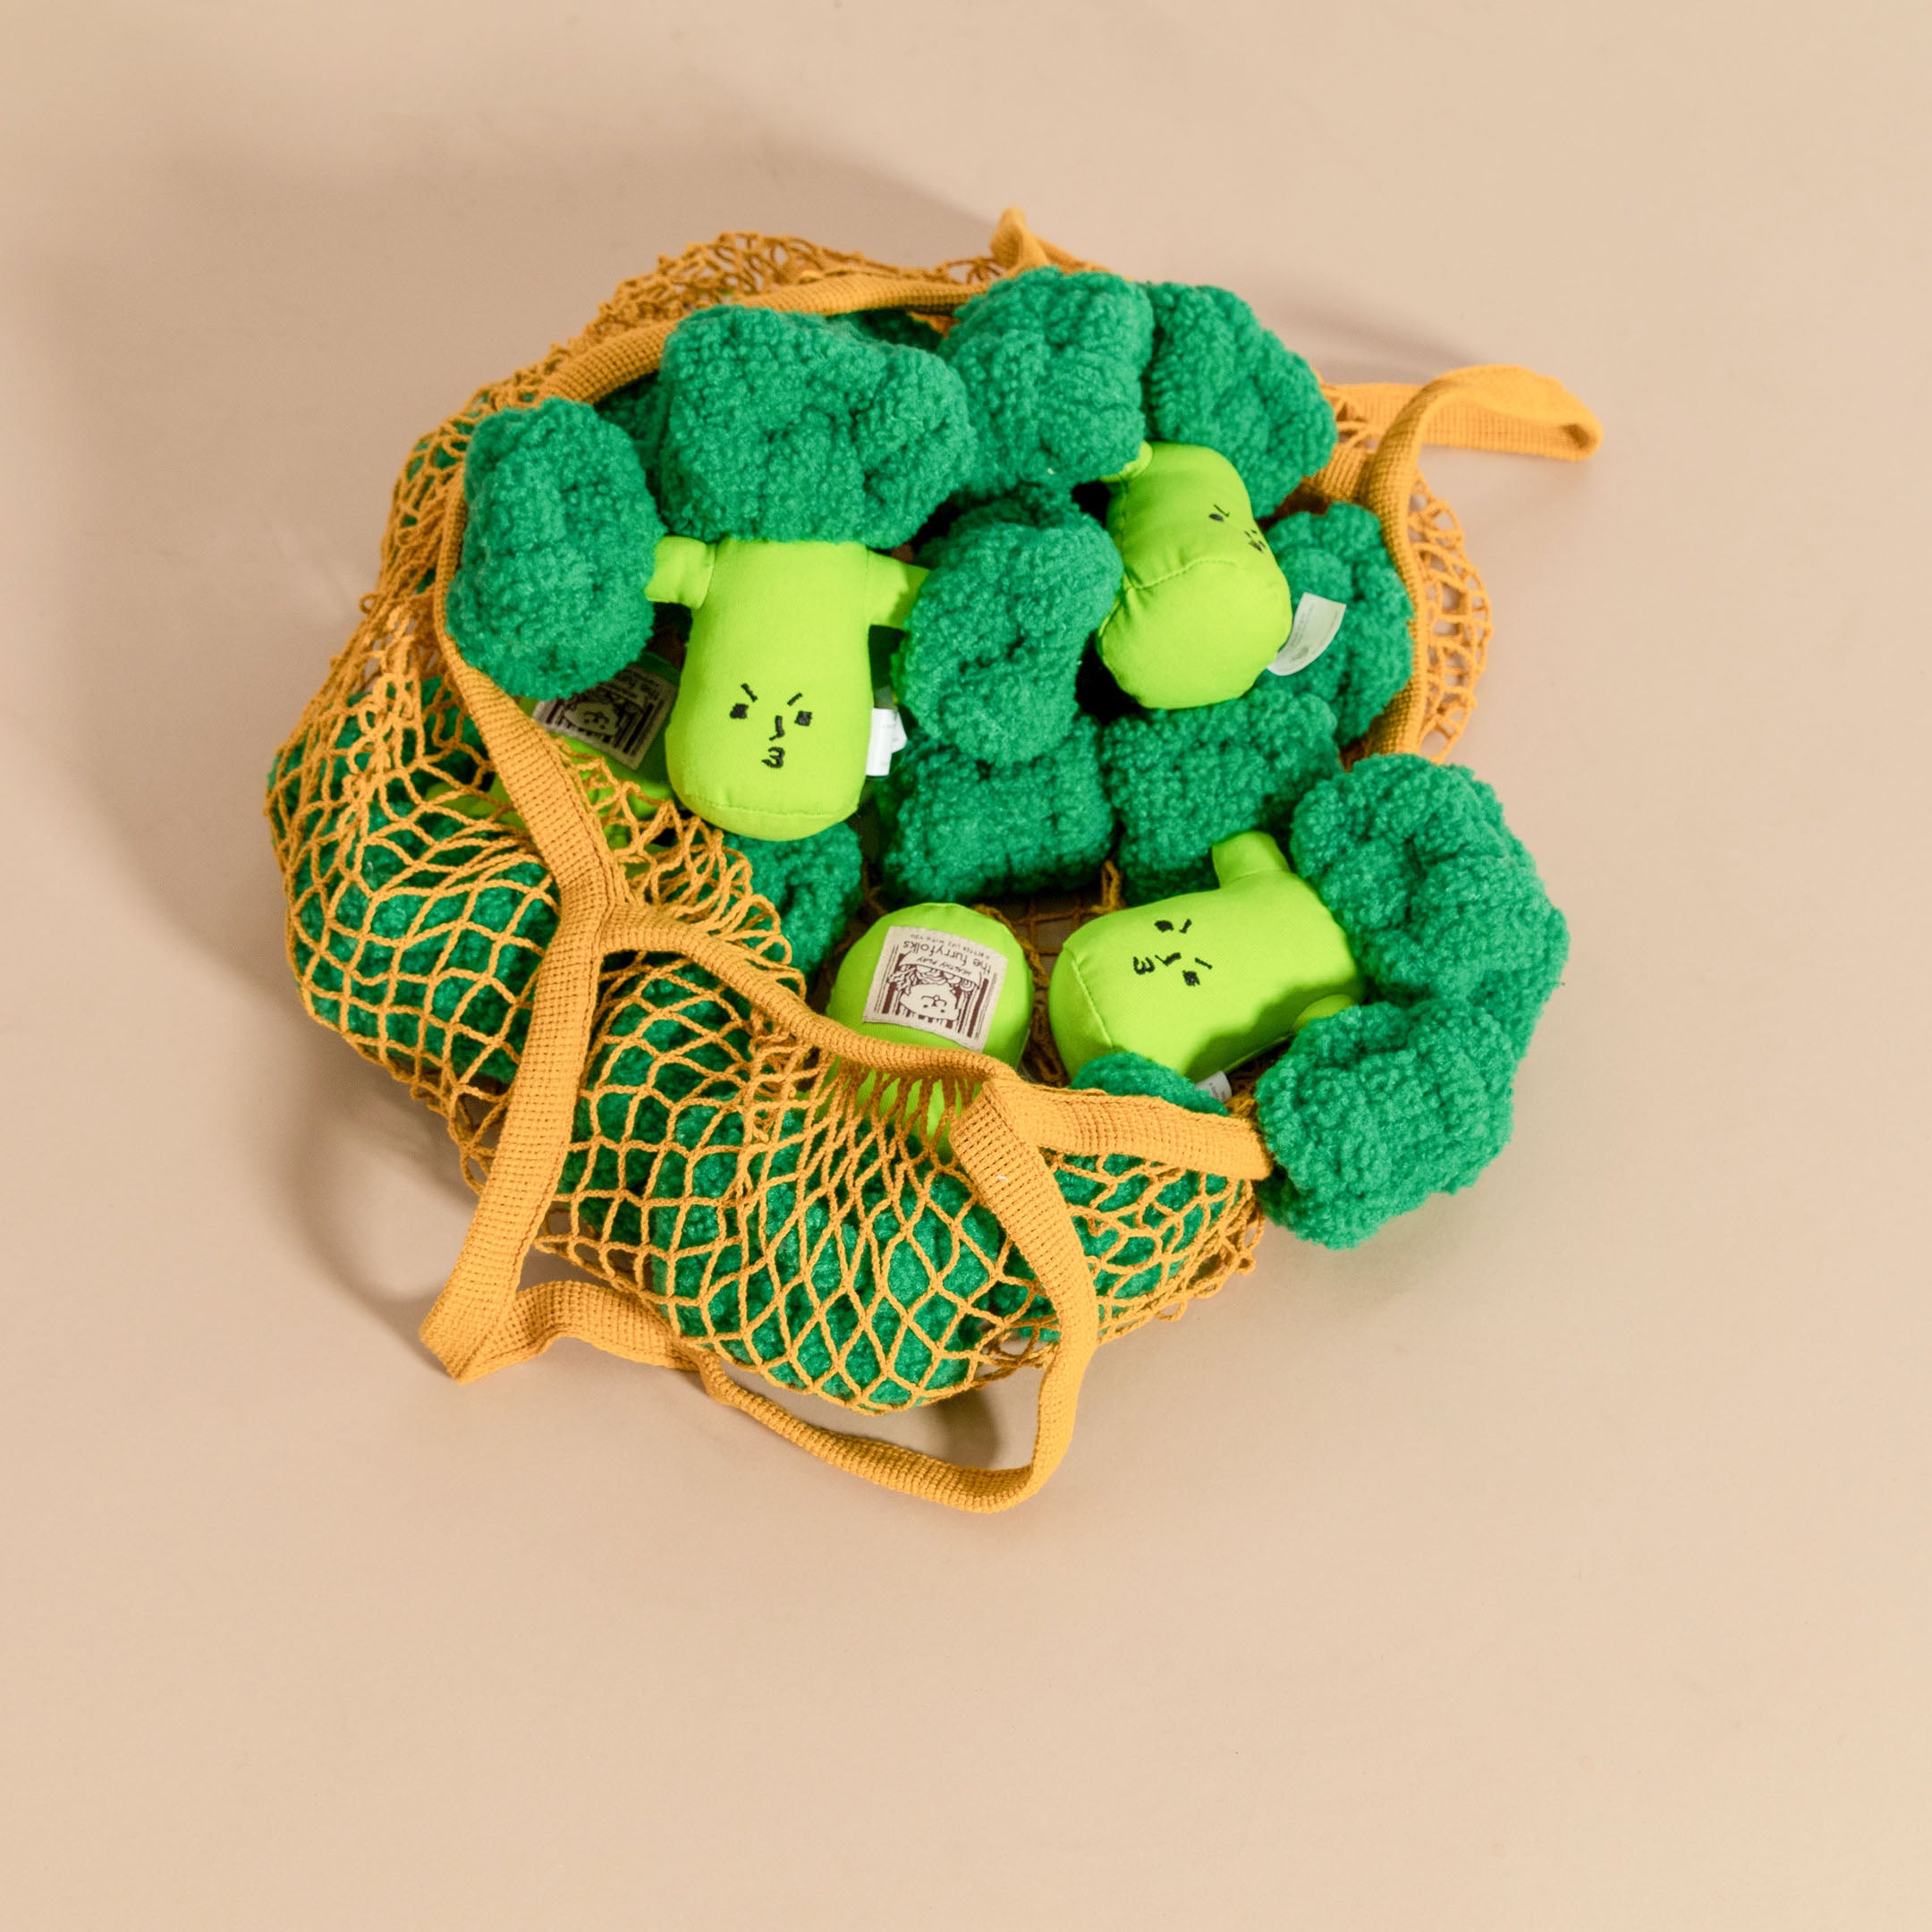 Yellow mesh bag filled with broccoli-shaped dog toys on a tan background.